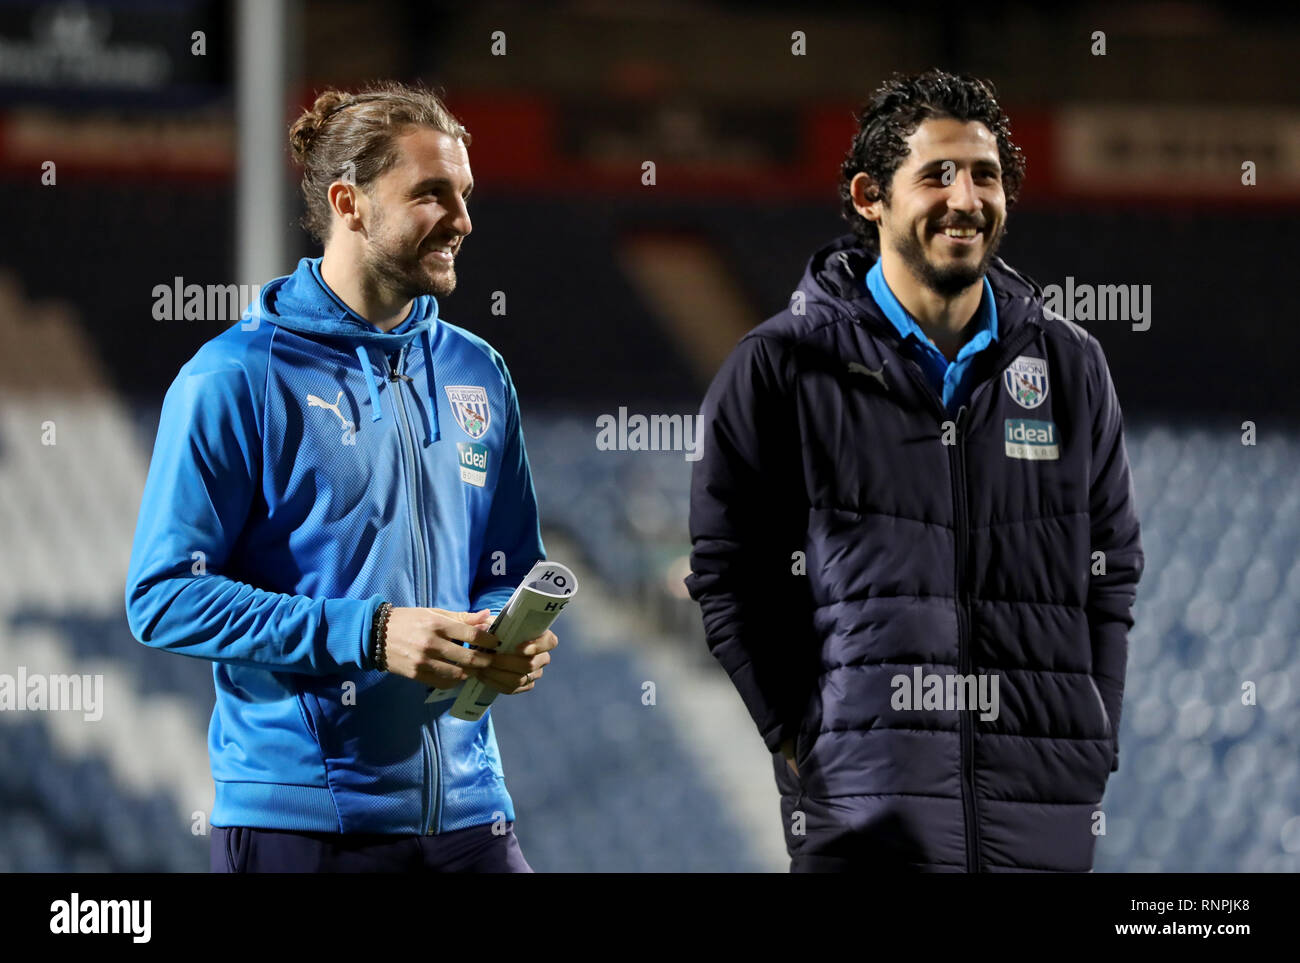 West Bromwich Albion's Jay Rodriguez (left) and Ahmed El-Sayed Hegazi (right) check out the pitch ahead of the Sky Bet Championship match at Loftus Road, London. Stock Photo